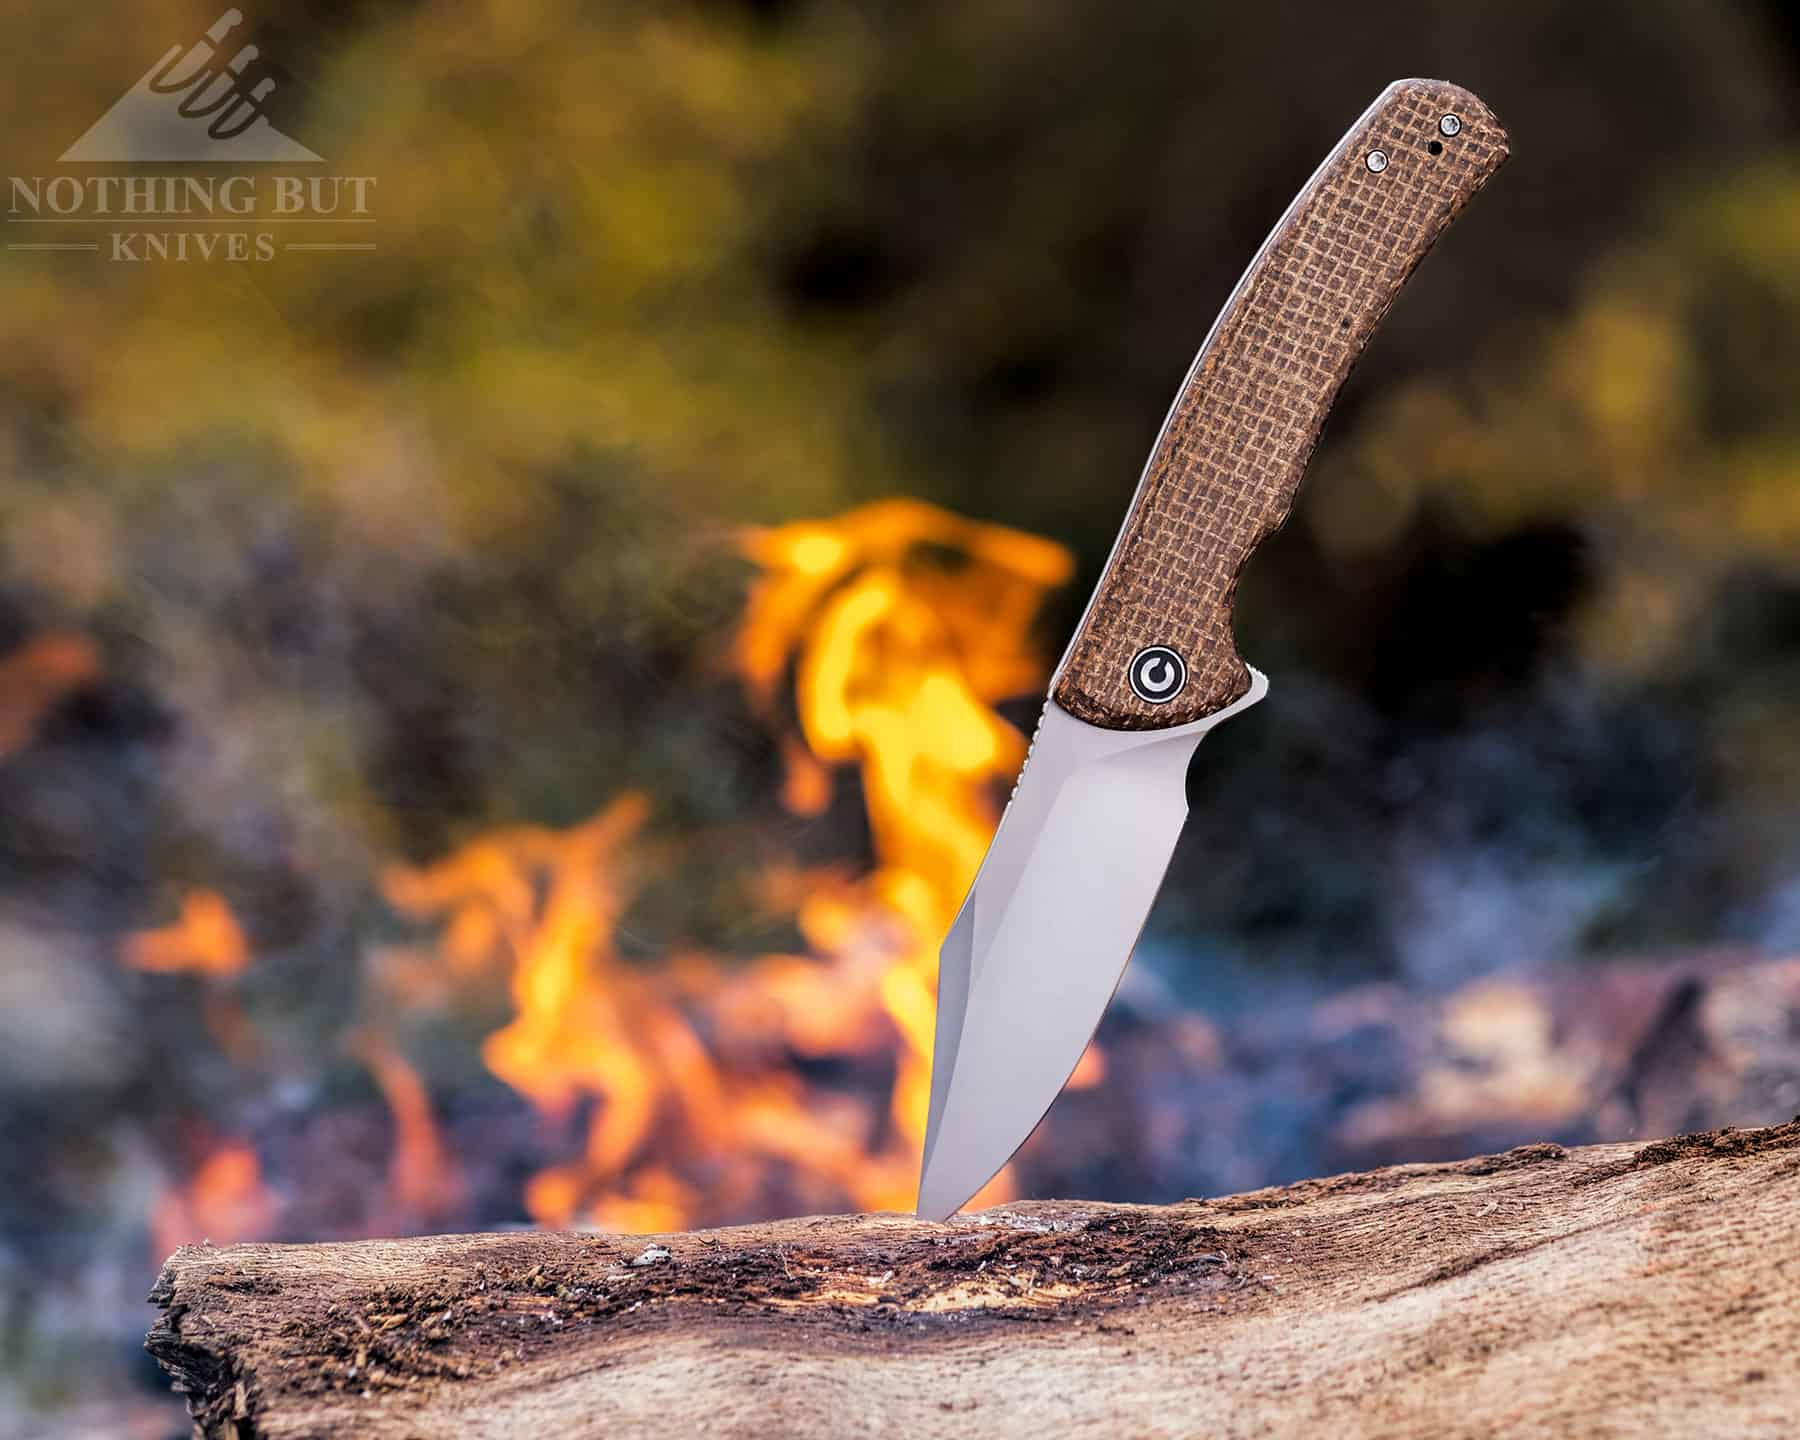 The Sinisys is a good camping knife. It handled most of the campfire related duties with ease.